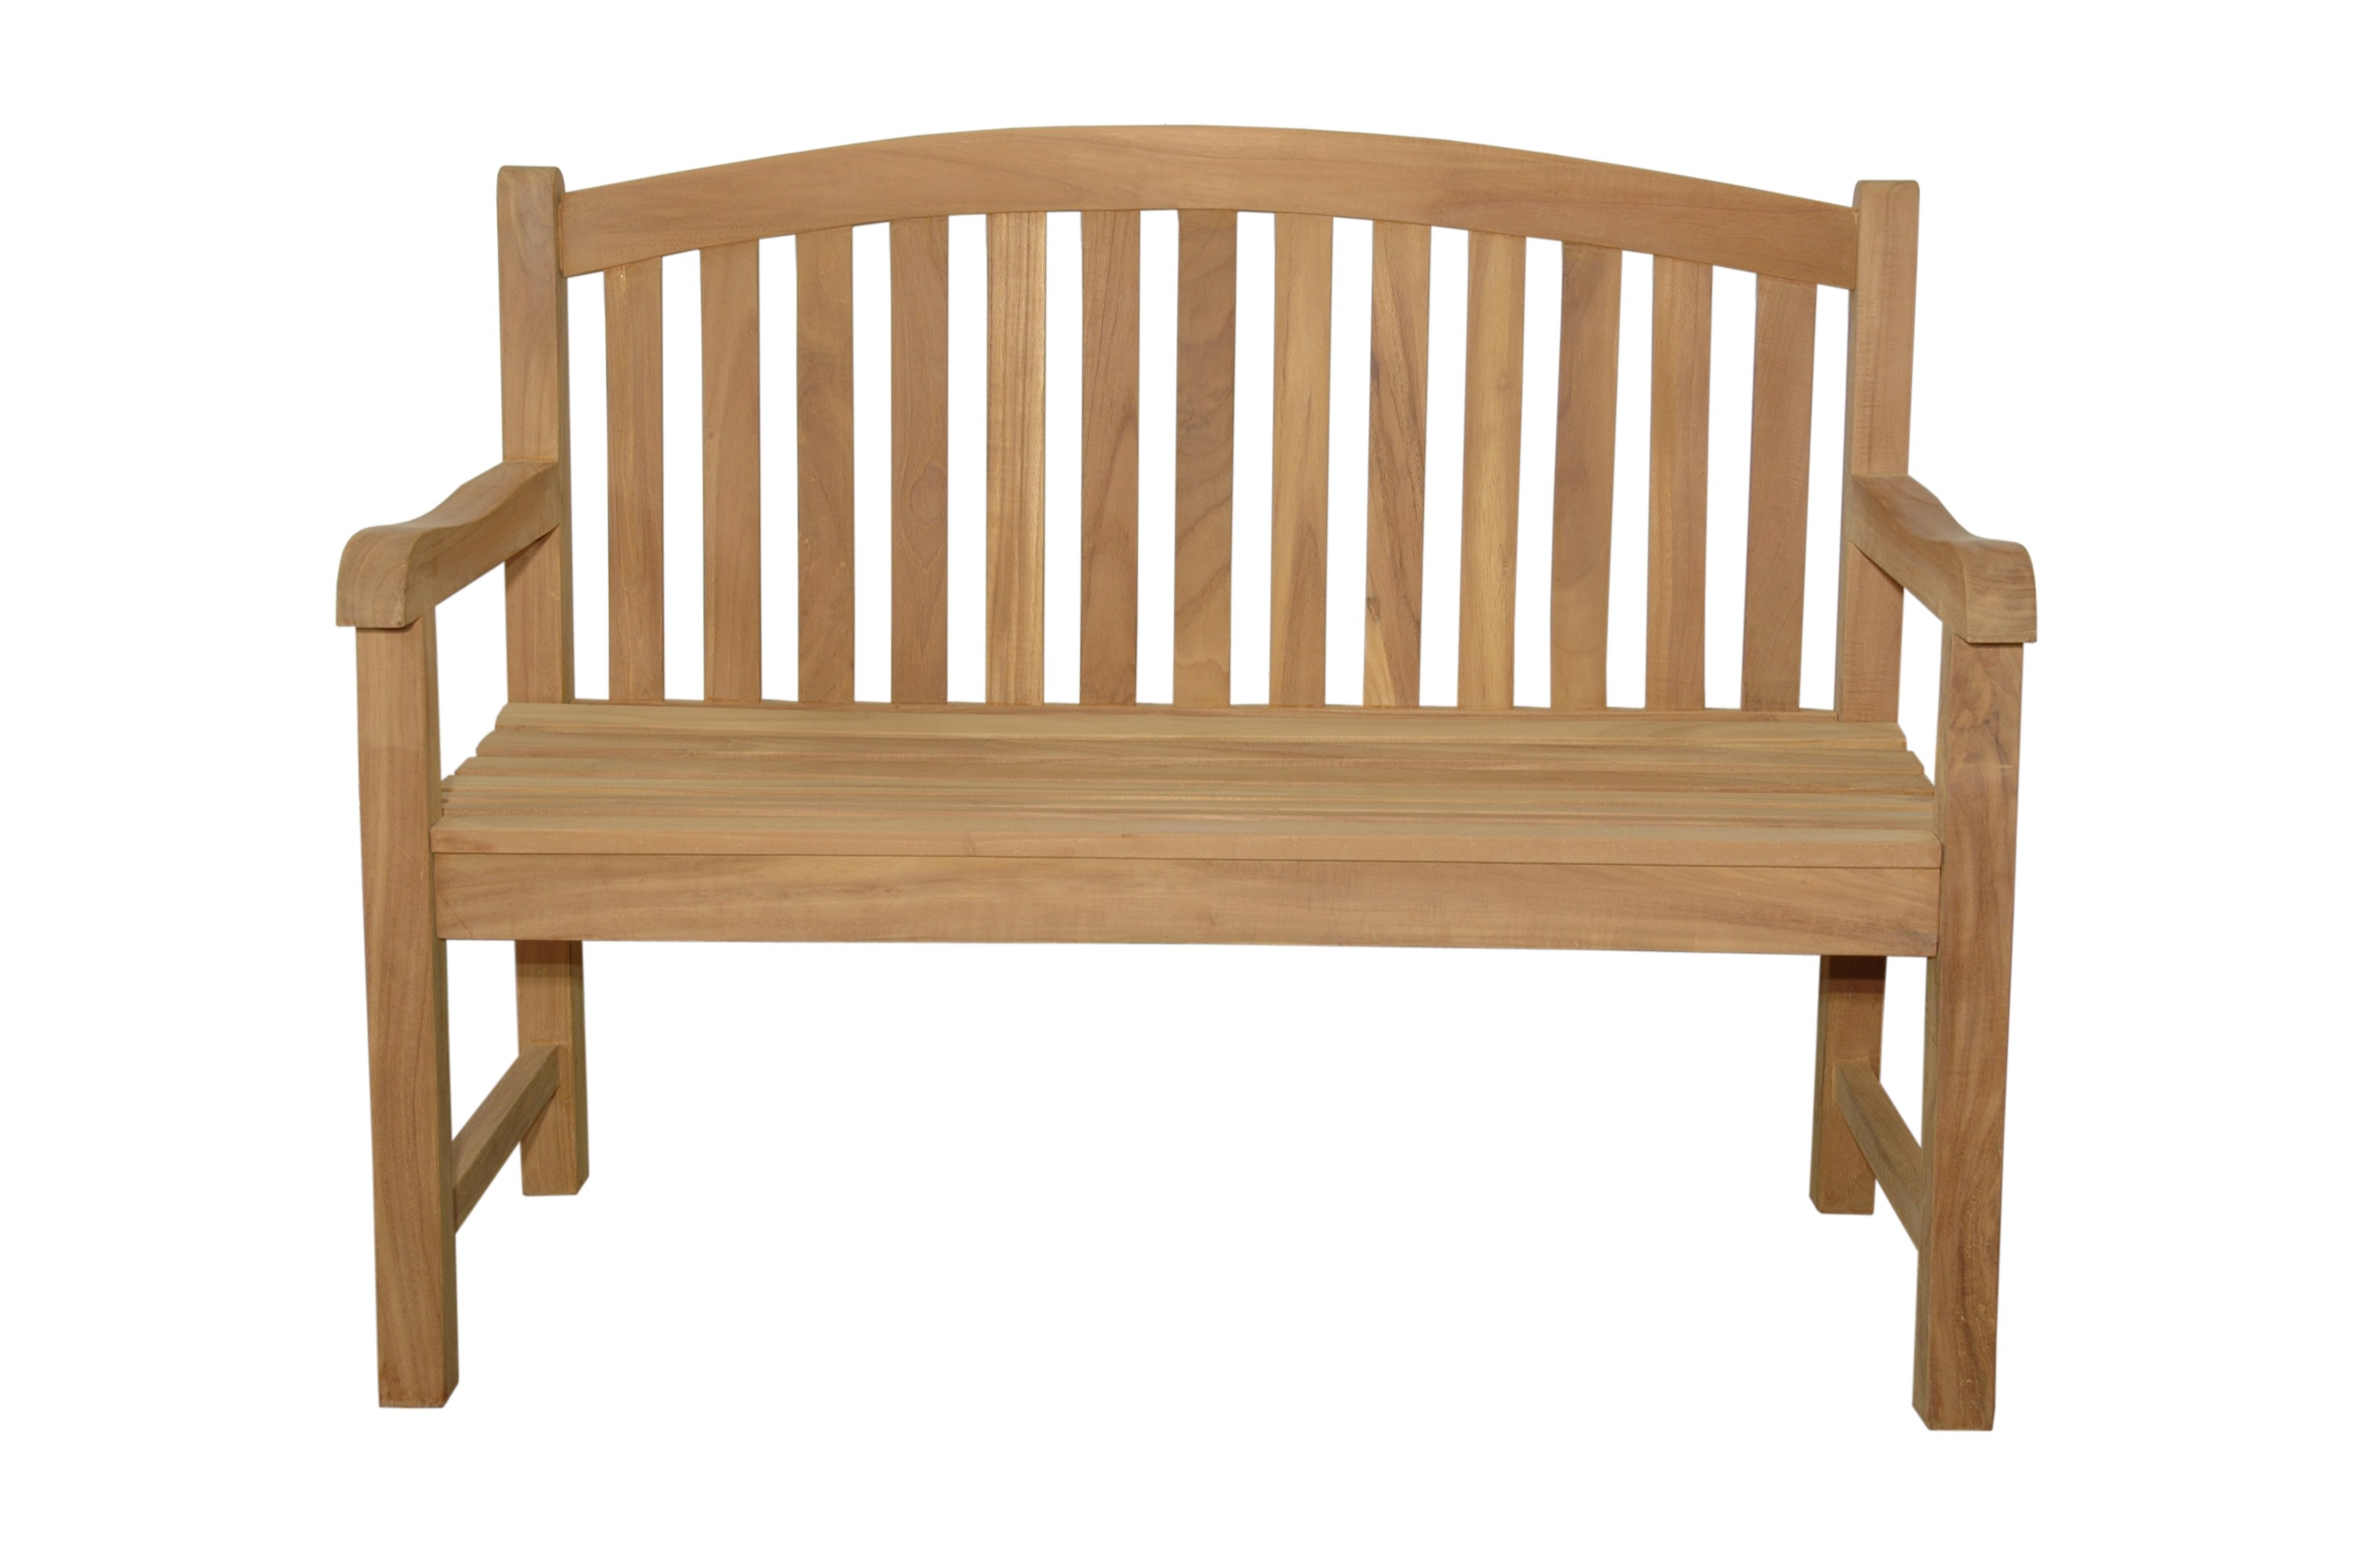 ANDERSON TEAK BH-004R CHELSEA 47 INCH 2-SEATER BENCH